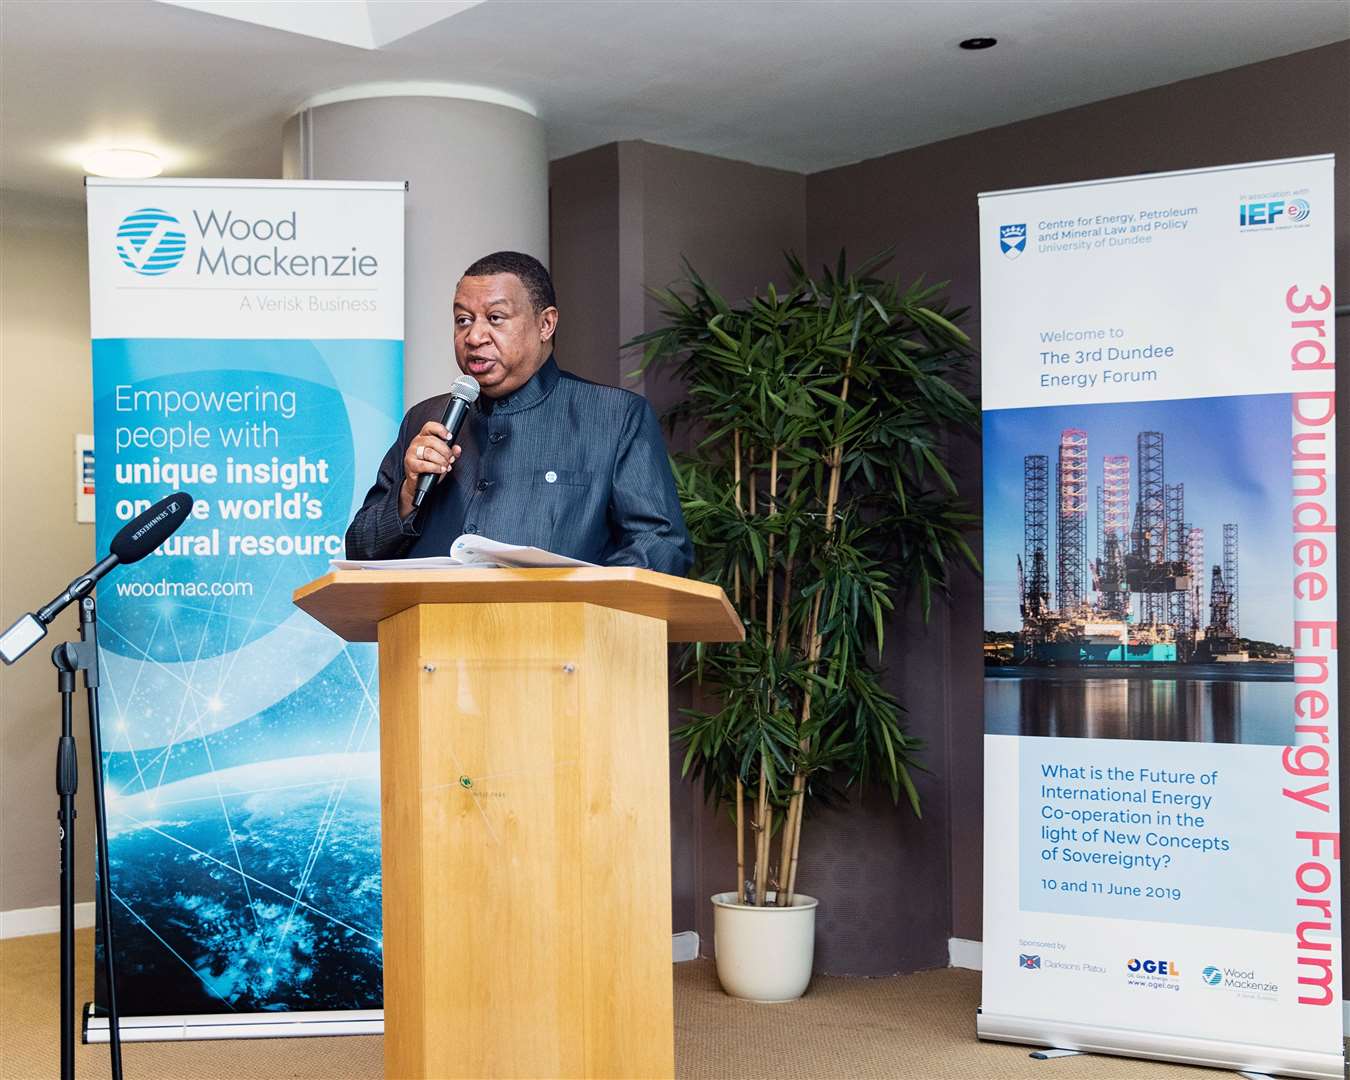 Mohammed Barkindo of OPEC speaks at the Dundee Energy Forum.